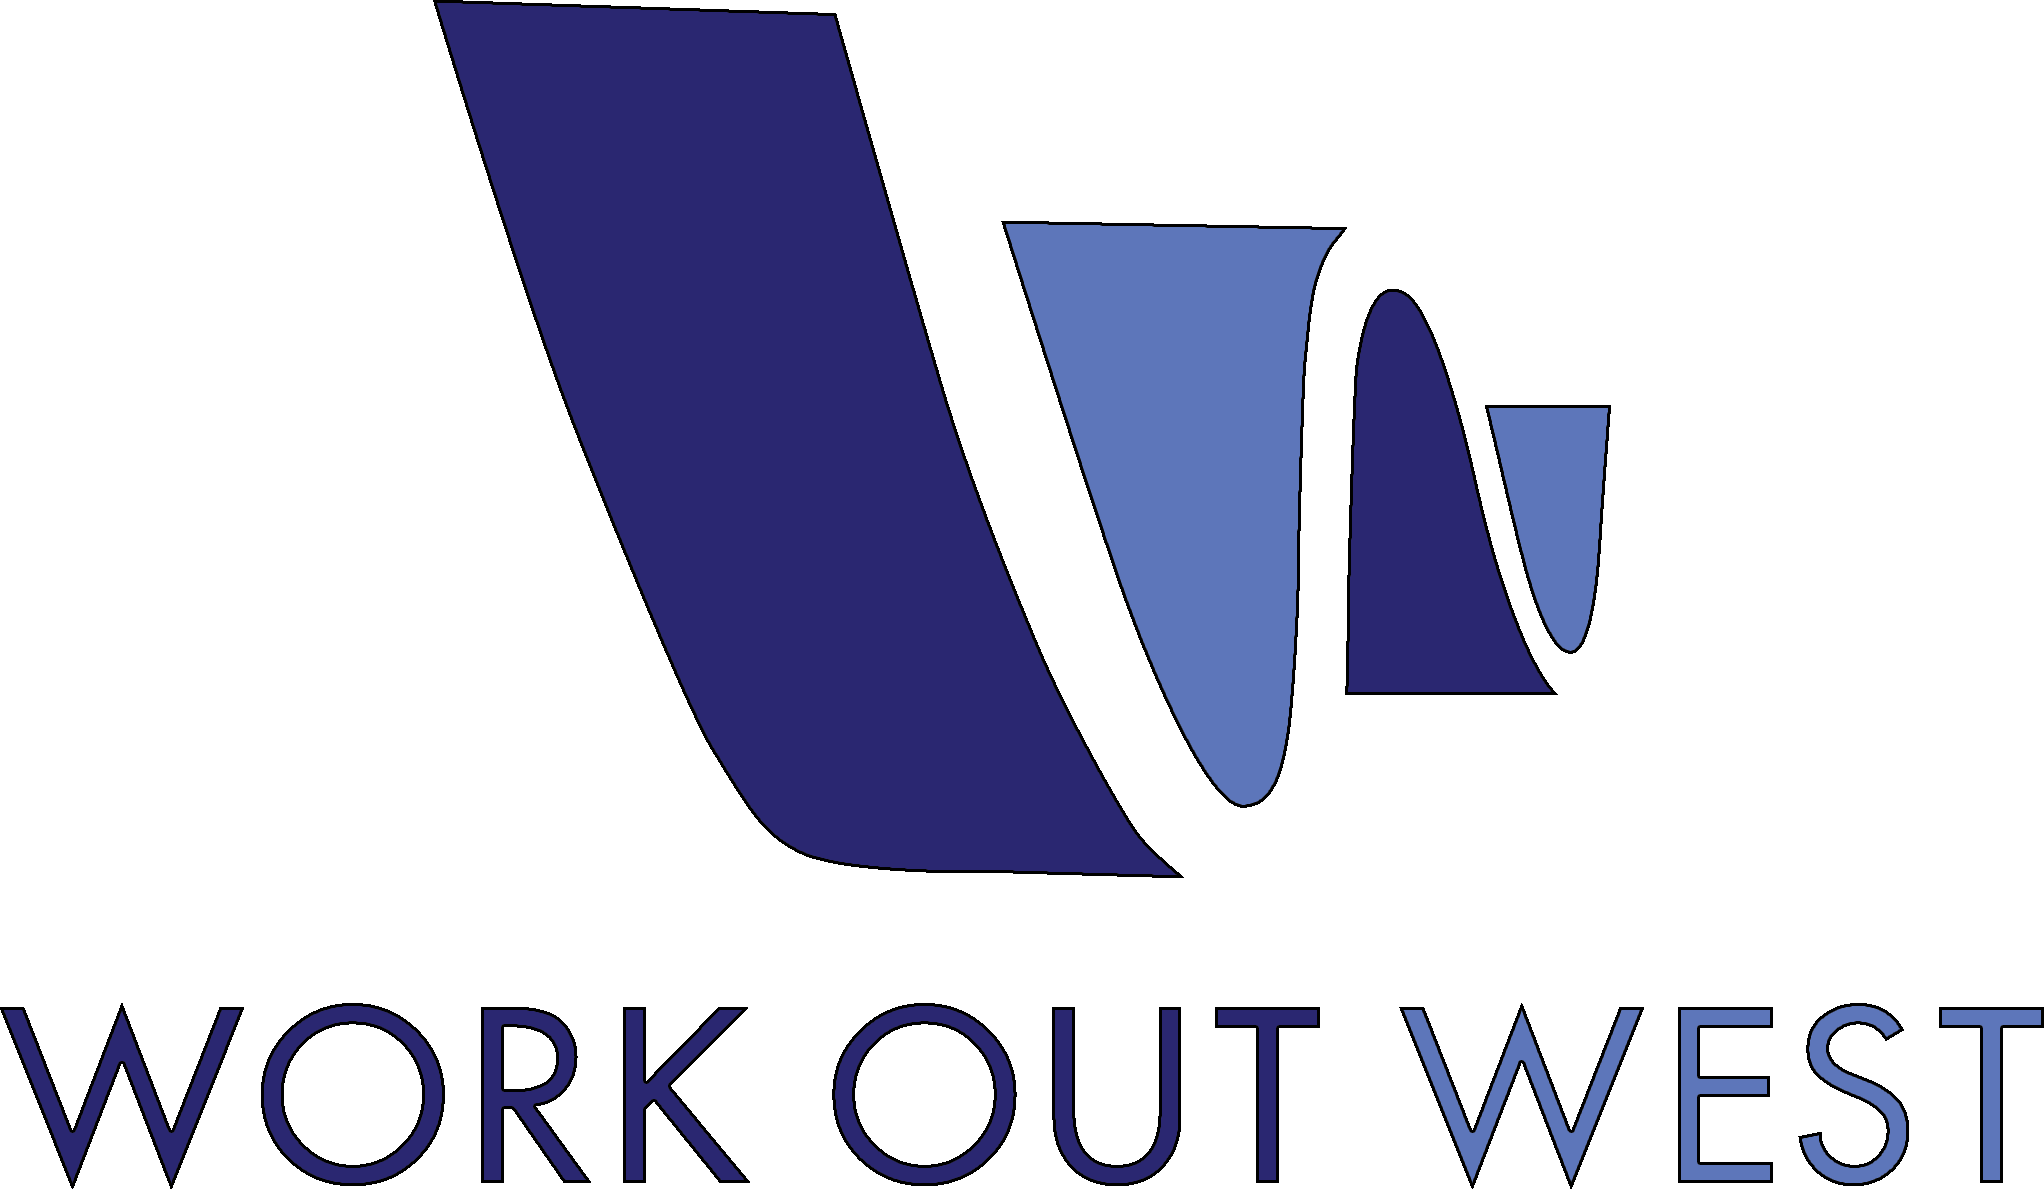 Work Out West